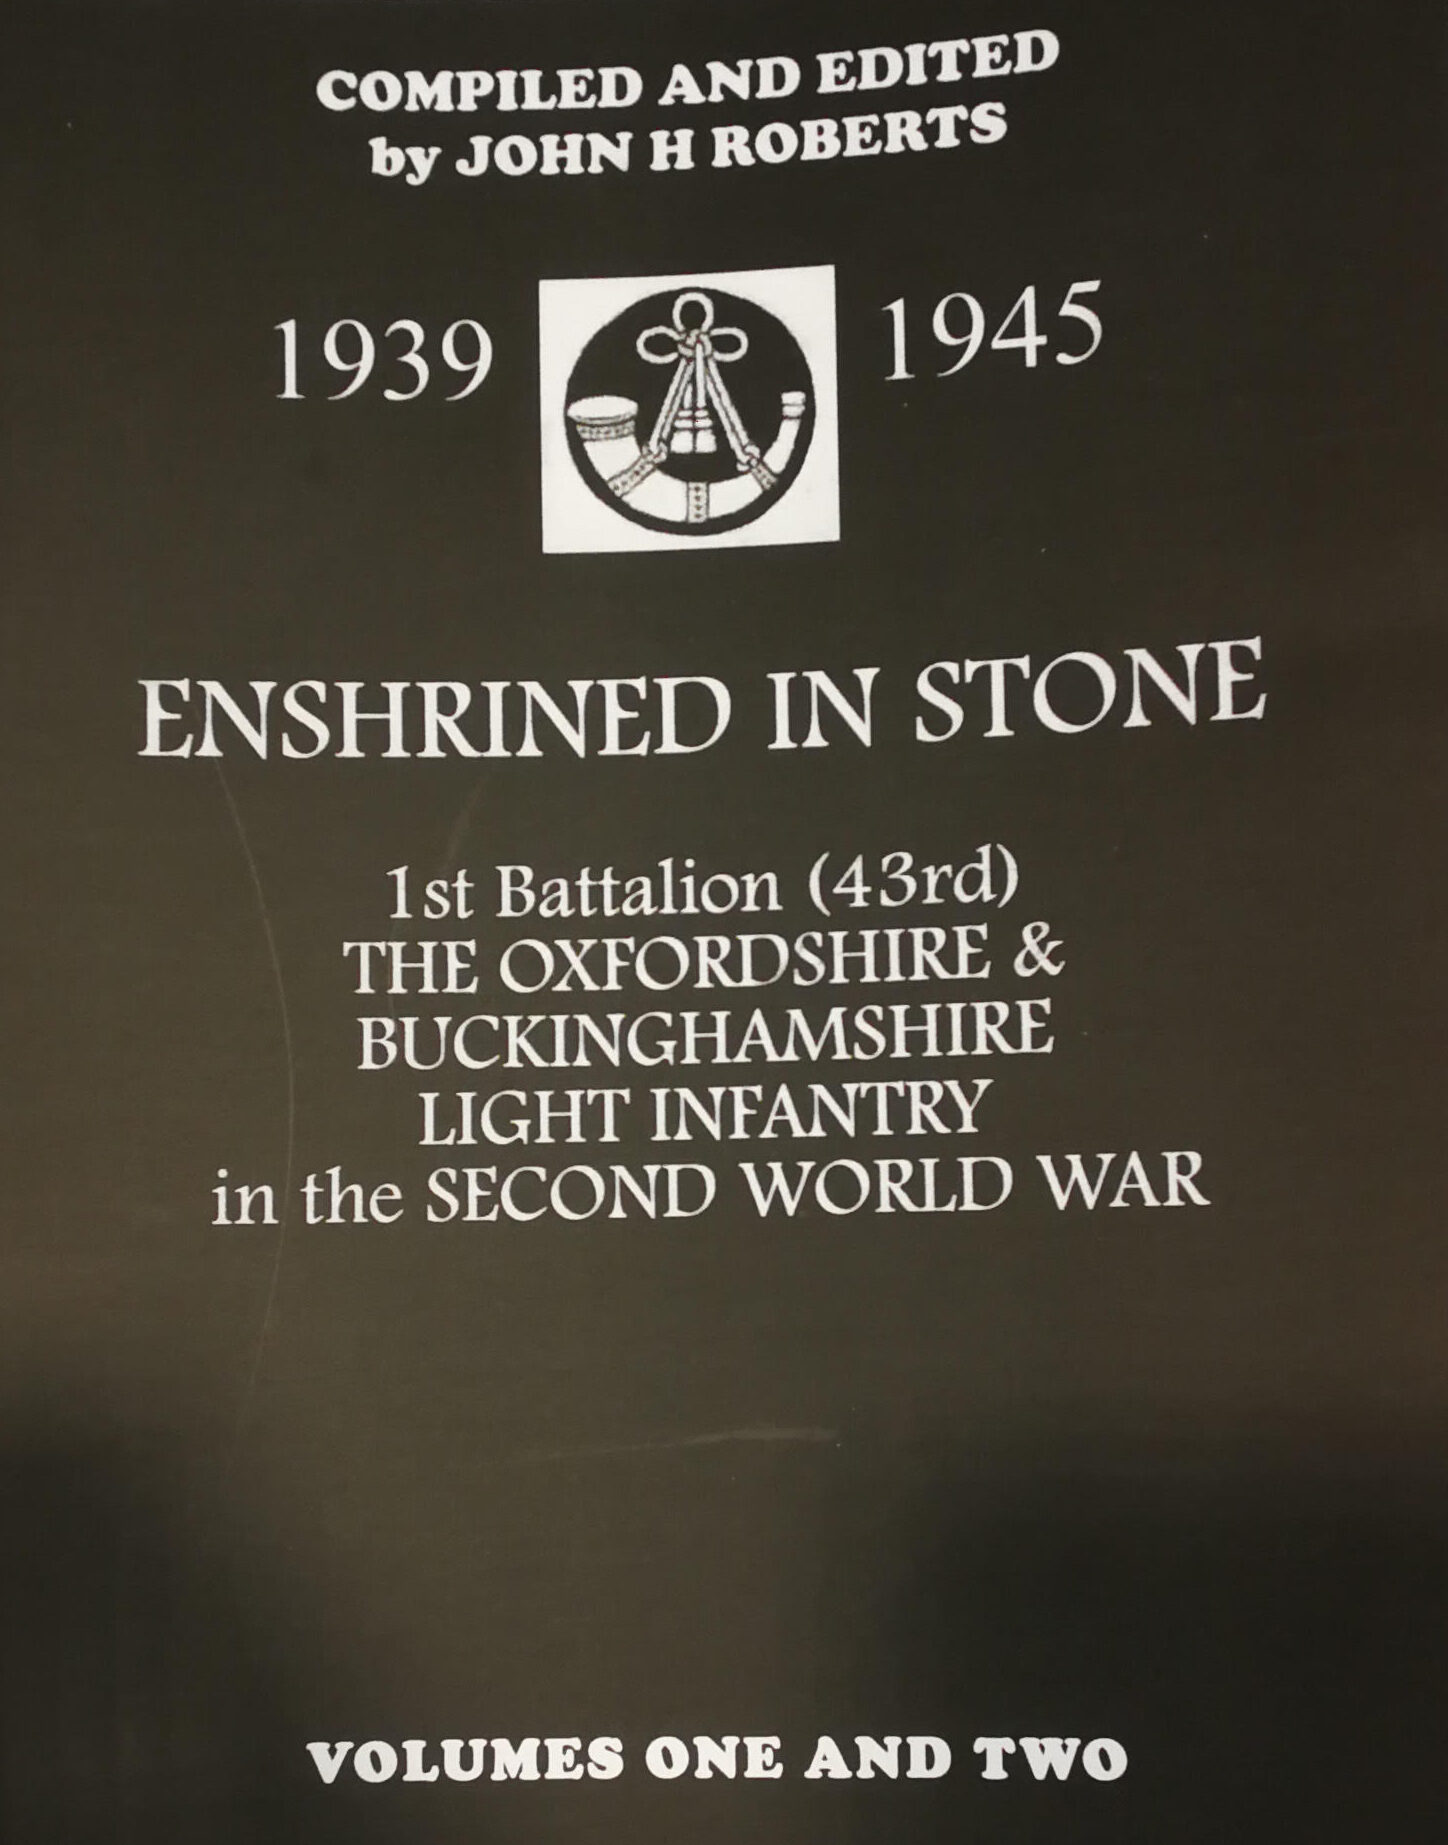 Enshrined in Stone: 1st Battalion The Oxfordshire and Buckinghamshire Light Infantry in the Second World War Vol. 1 + 2